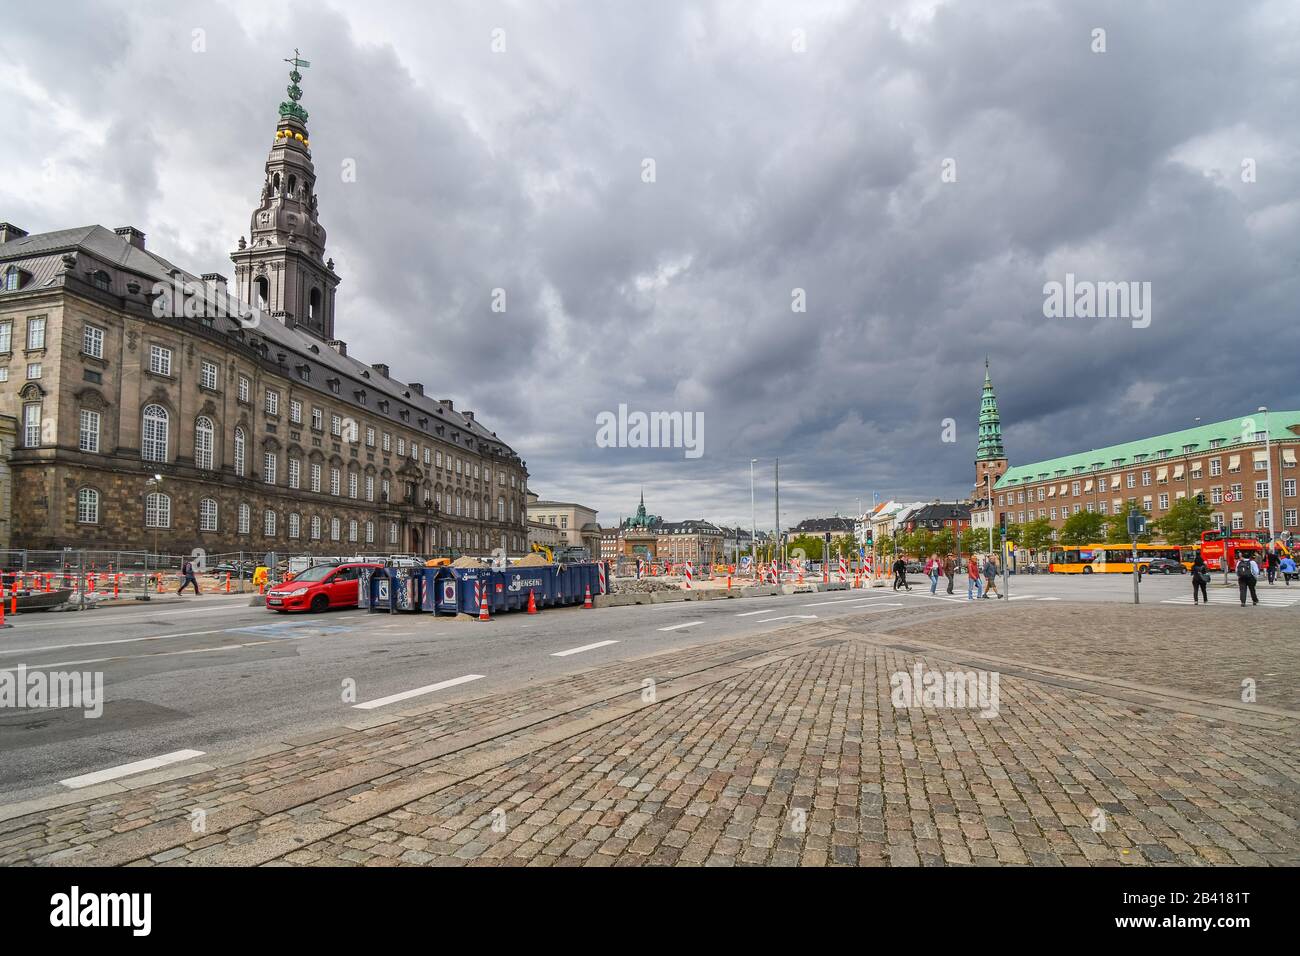 Tourists and Danes walk past construction work in the Hojbro Plads main square with the spire of St Nicholas church and Christiansborg Slot in view Stock Photo